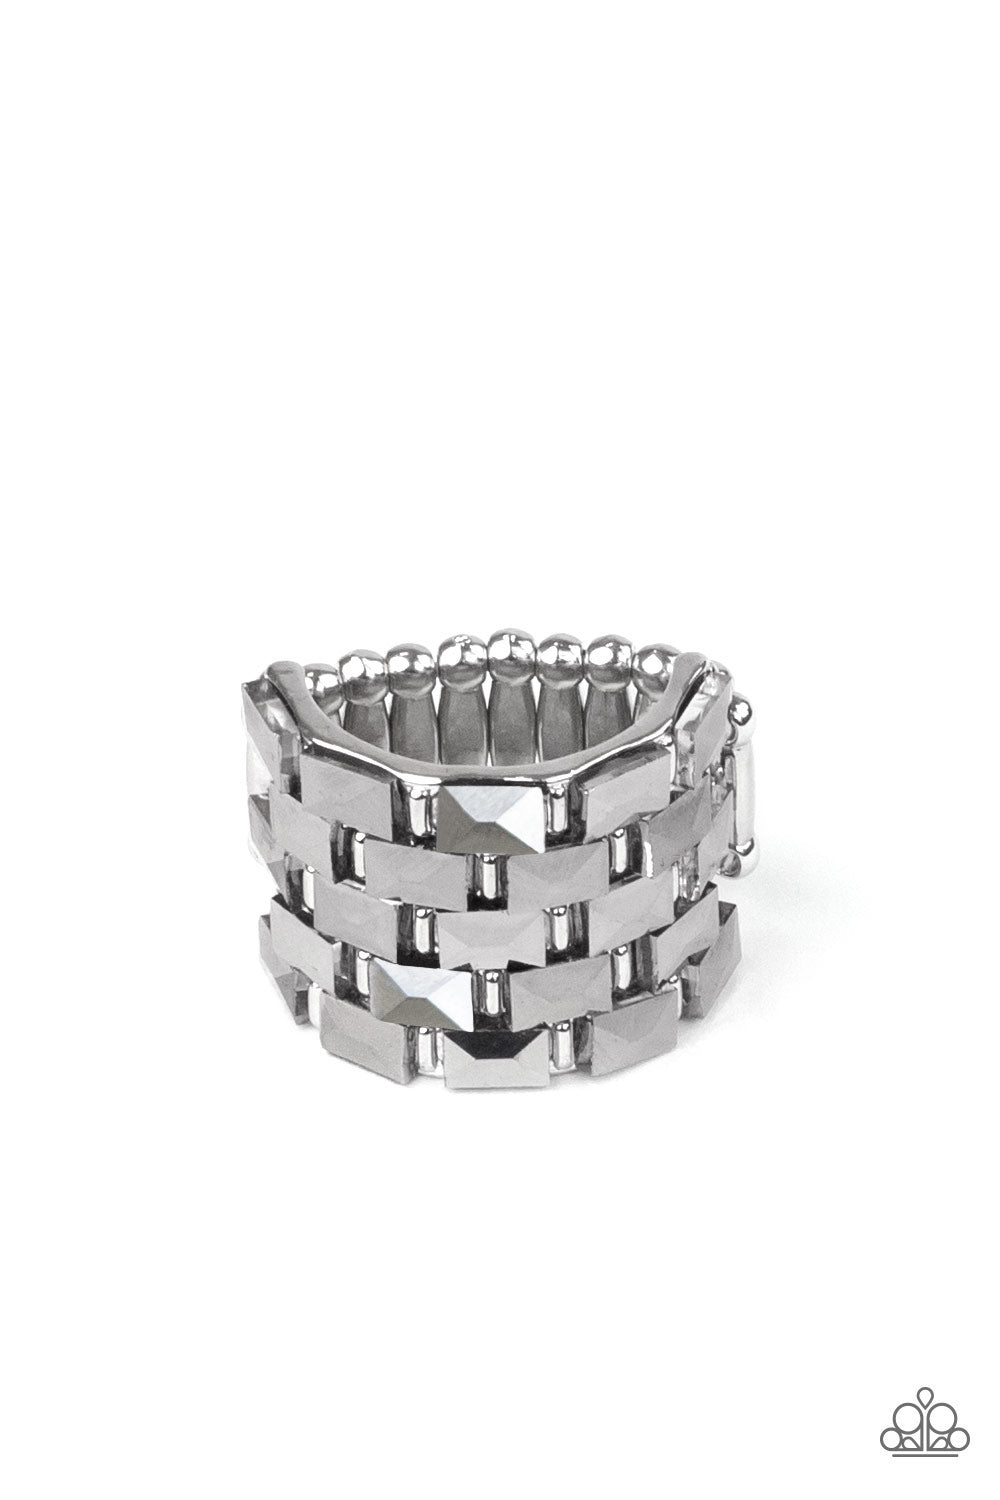 Paparazzi Accessories - Checkered Couture - Silver Ring